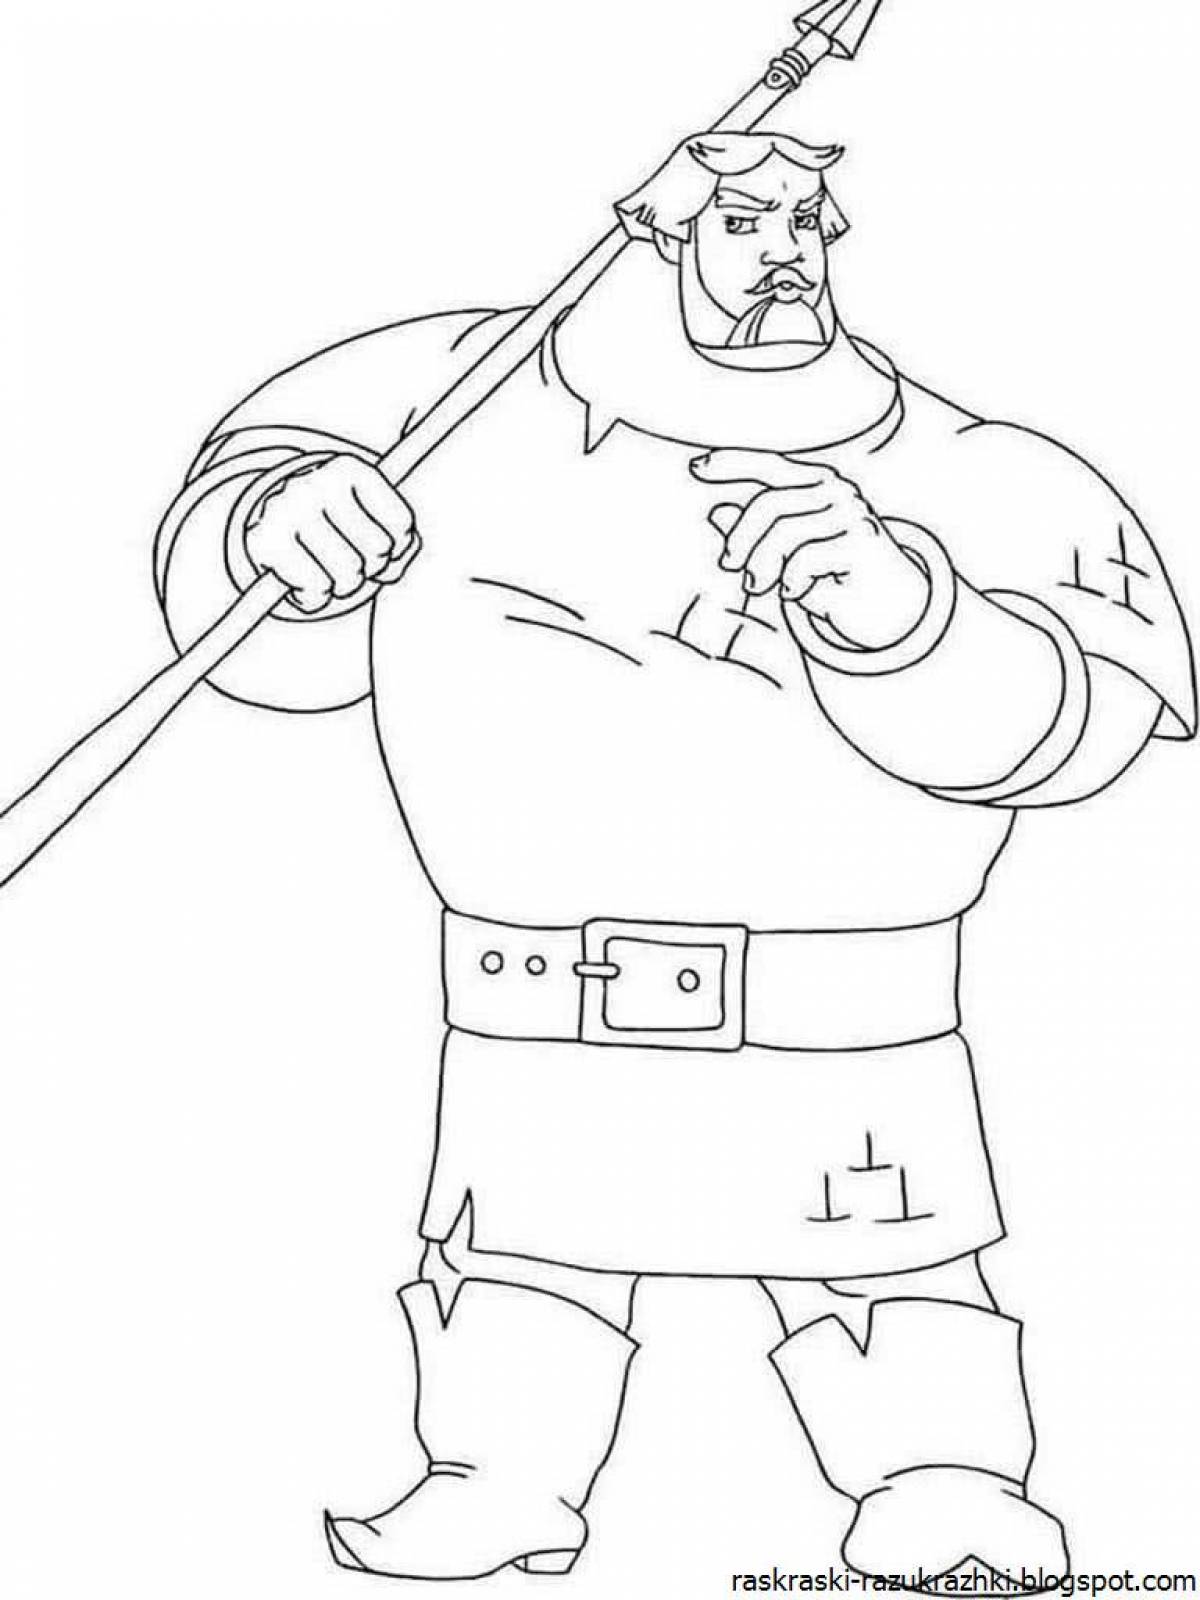 Great coloring page 3 heroes